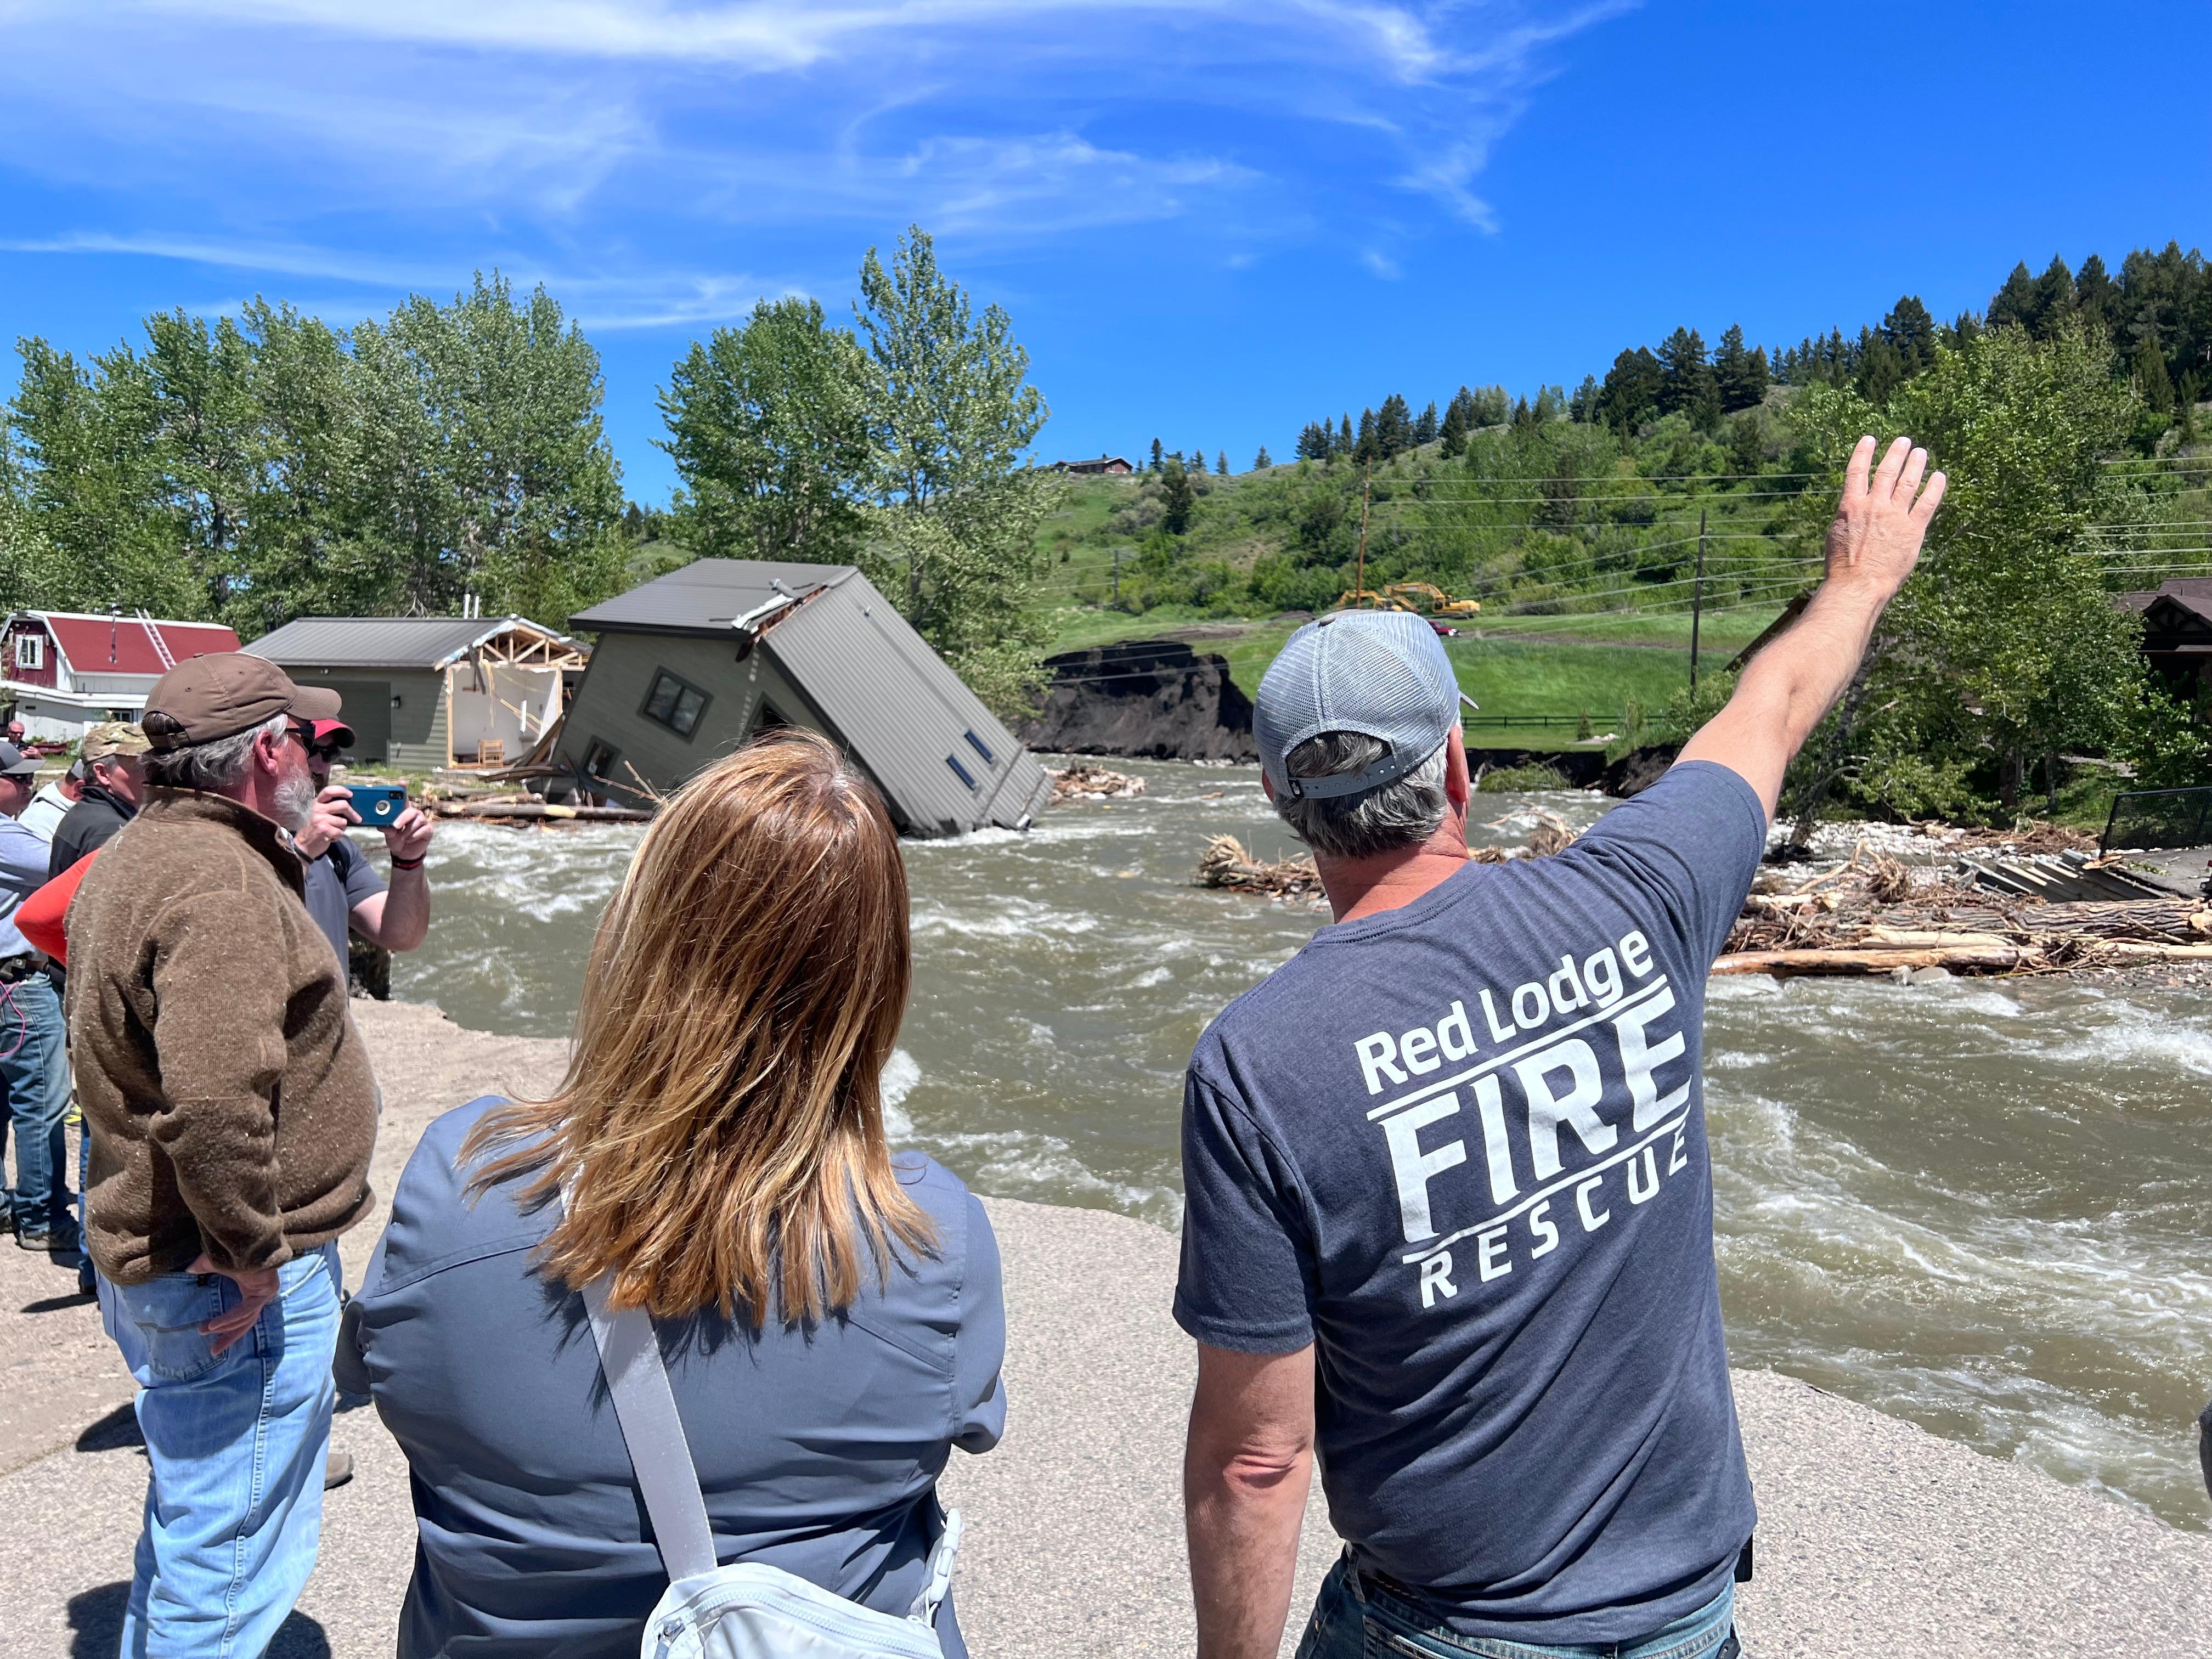 Red Lodge Fire and Rescue Chief, and FEMA Administrator, touring the flood damage in Red Lodge. ge